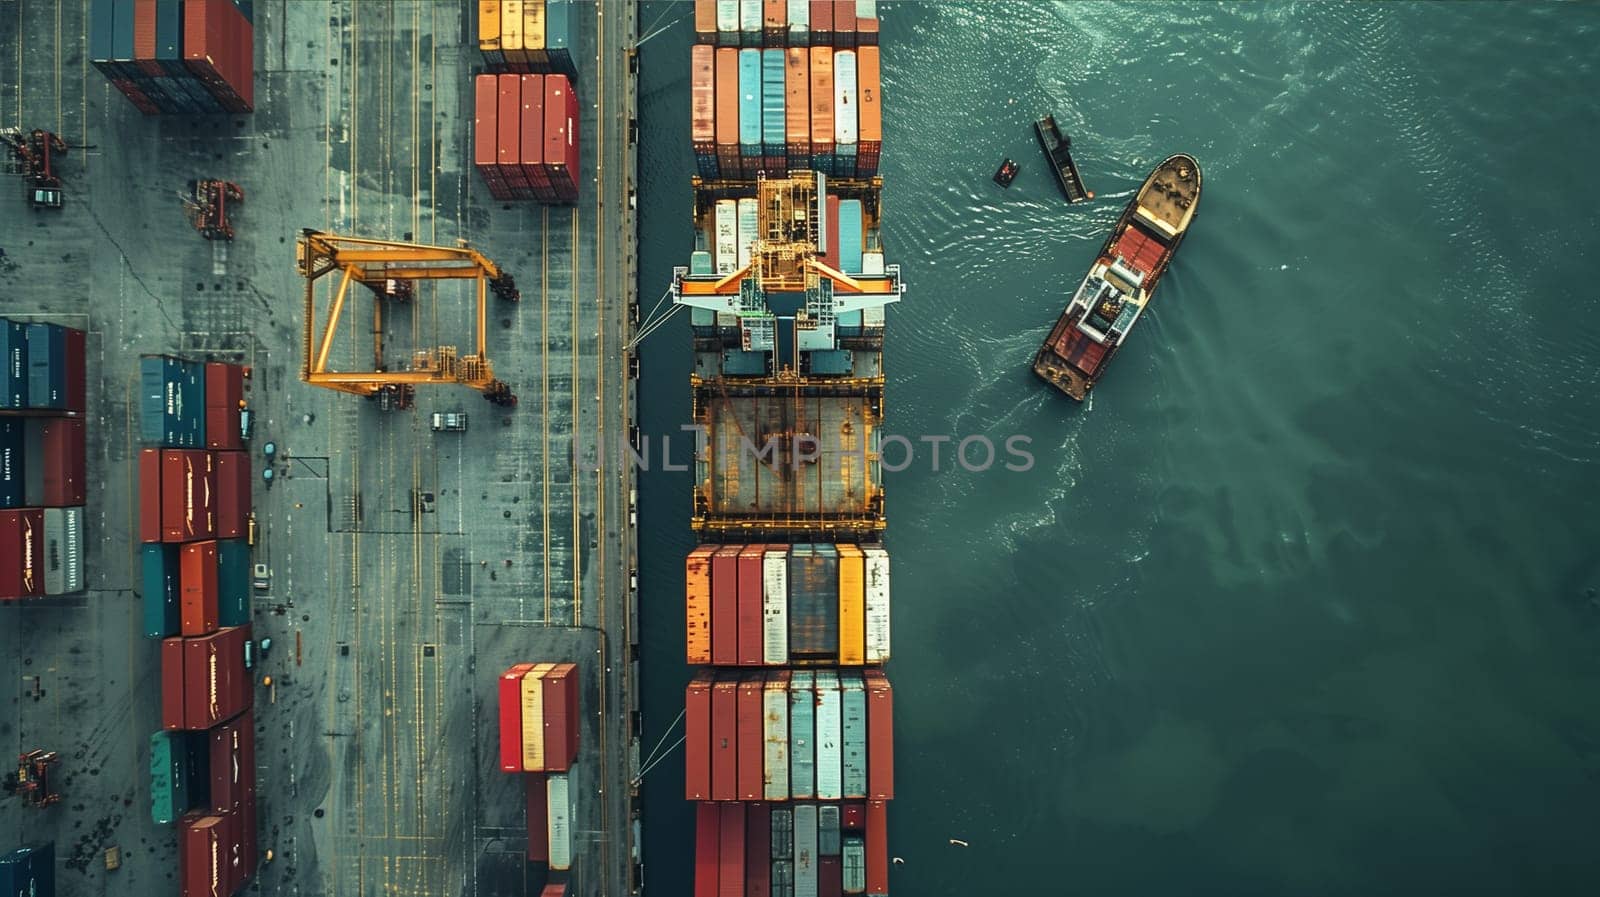 A cargo ship loaded with containers sails across the vast ocean in this aerial view.